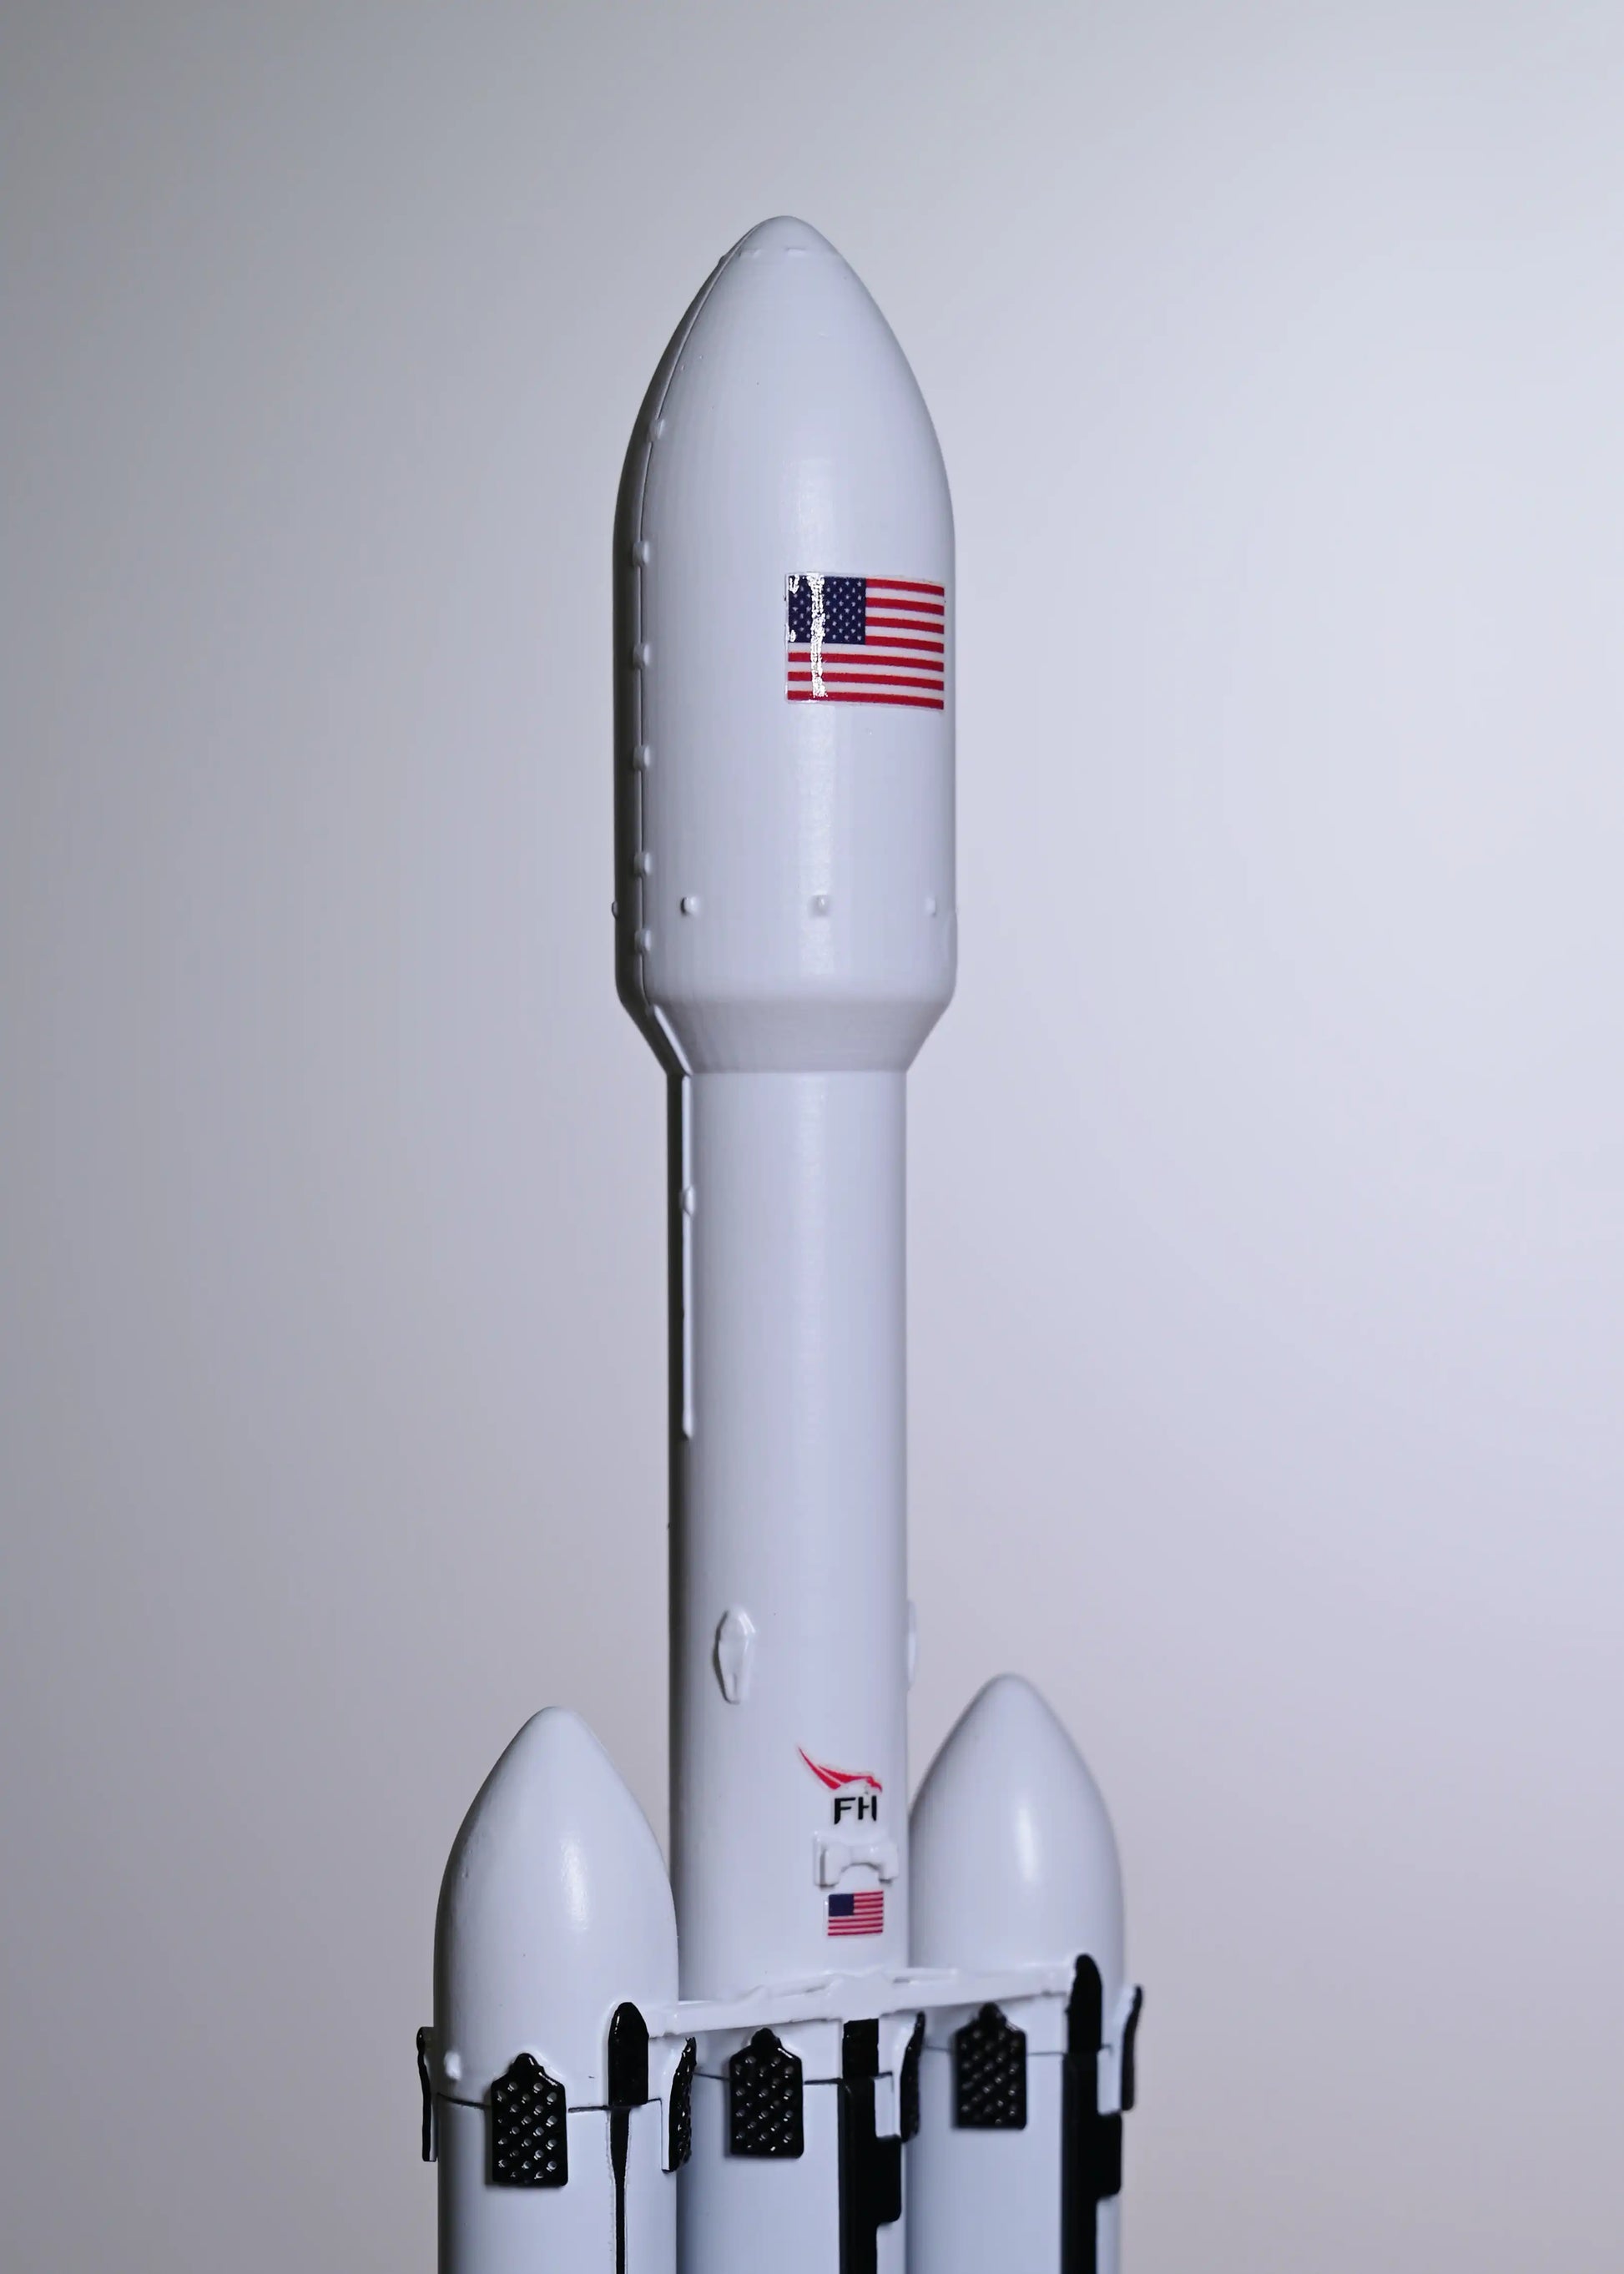 The main fairing with the US flag on the Falcon Heavy rocket